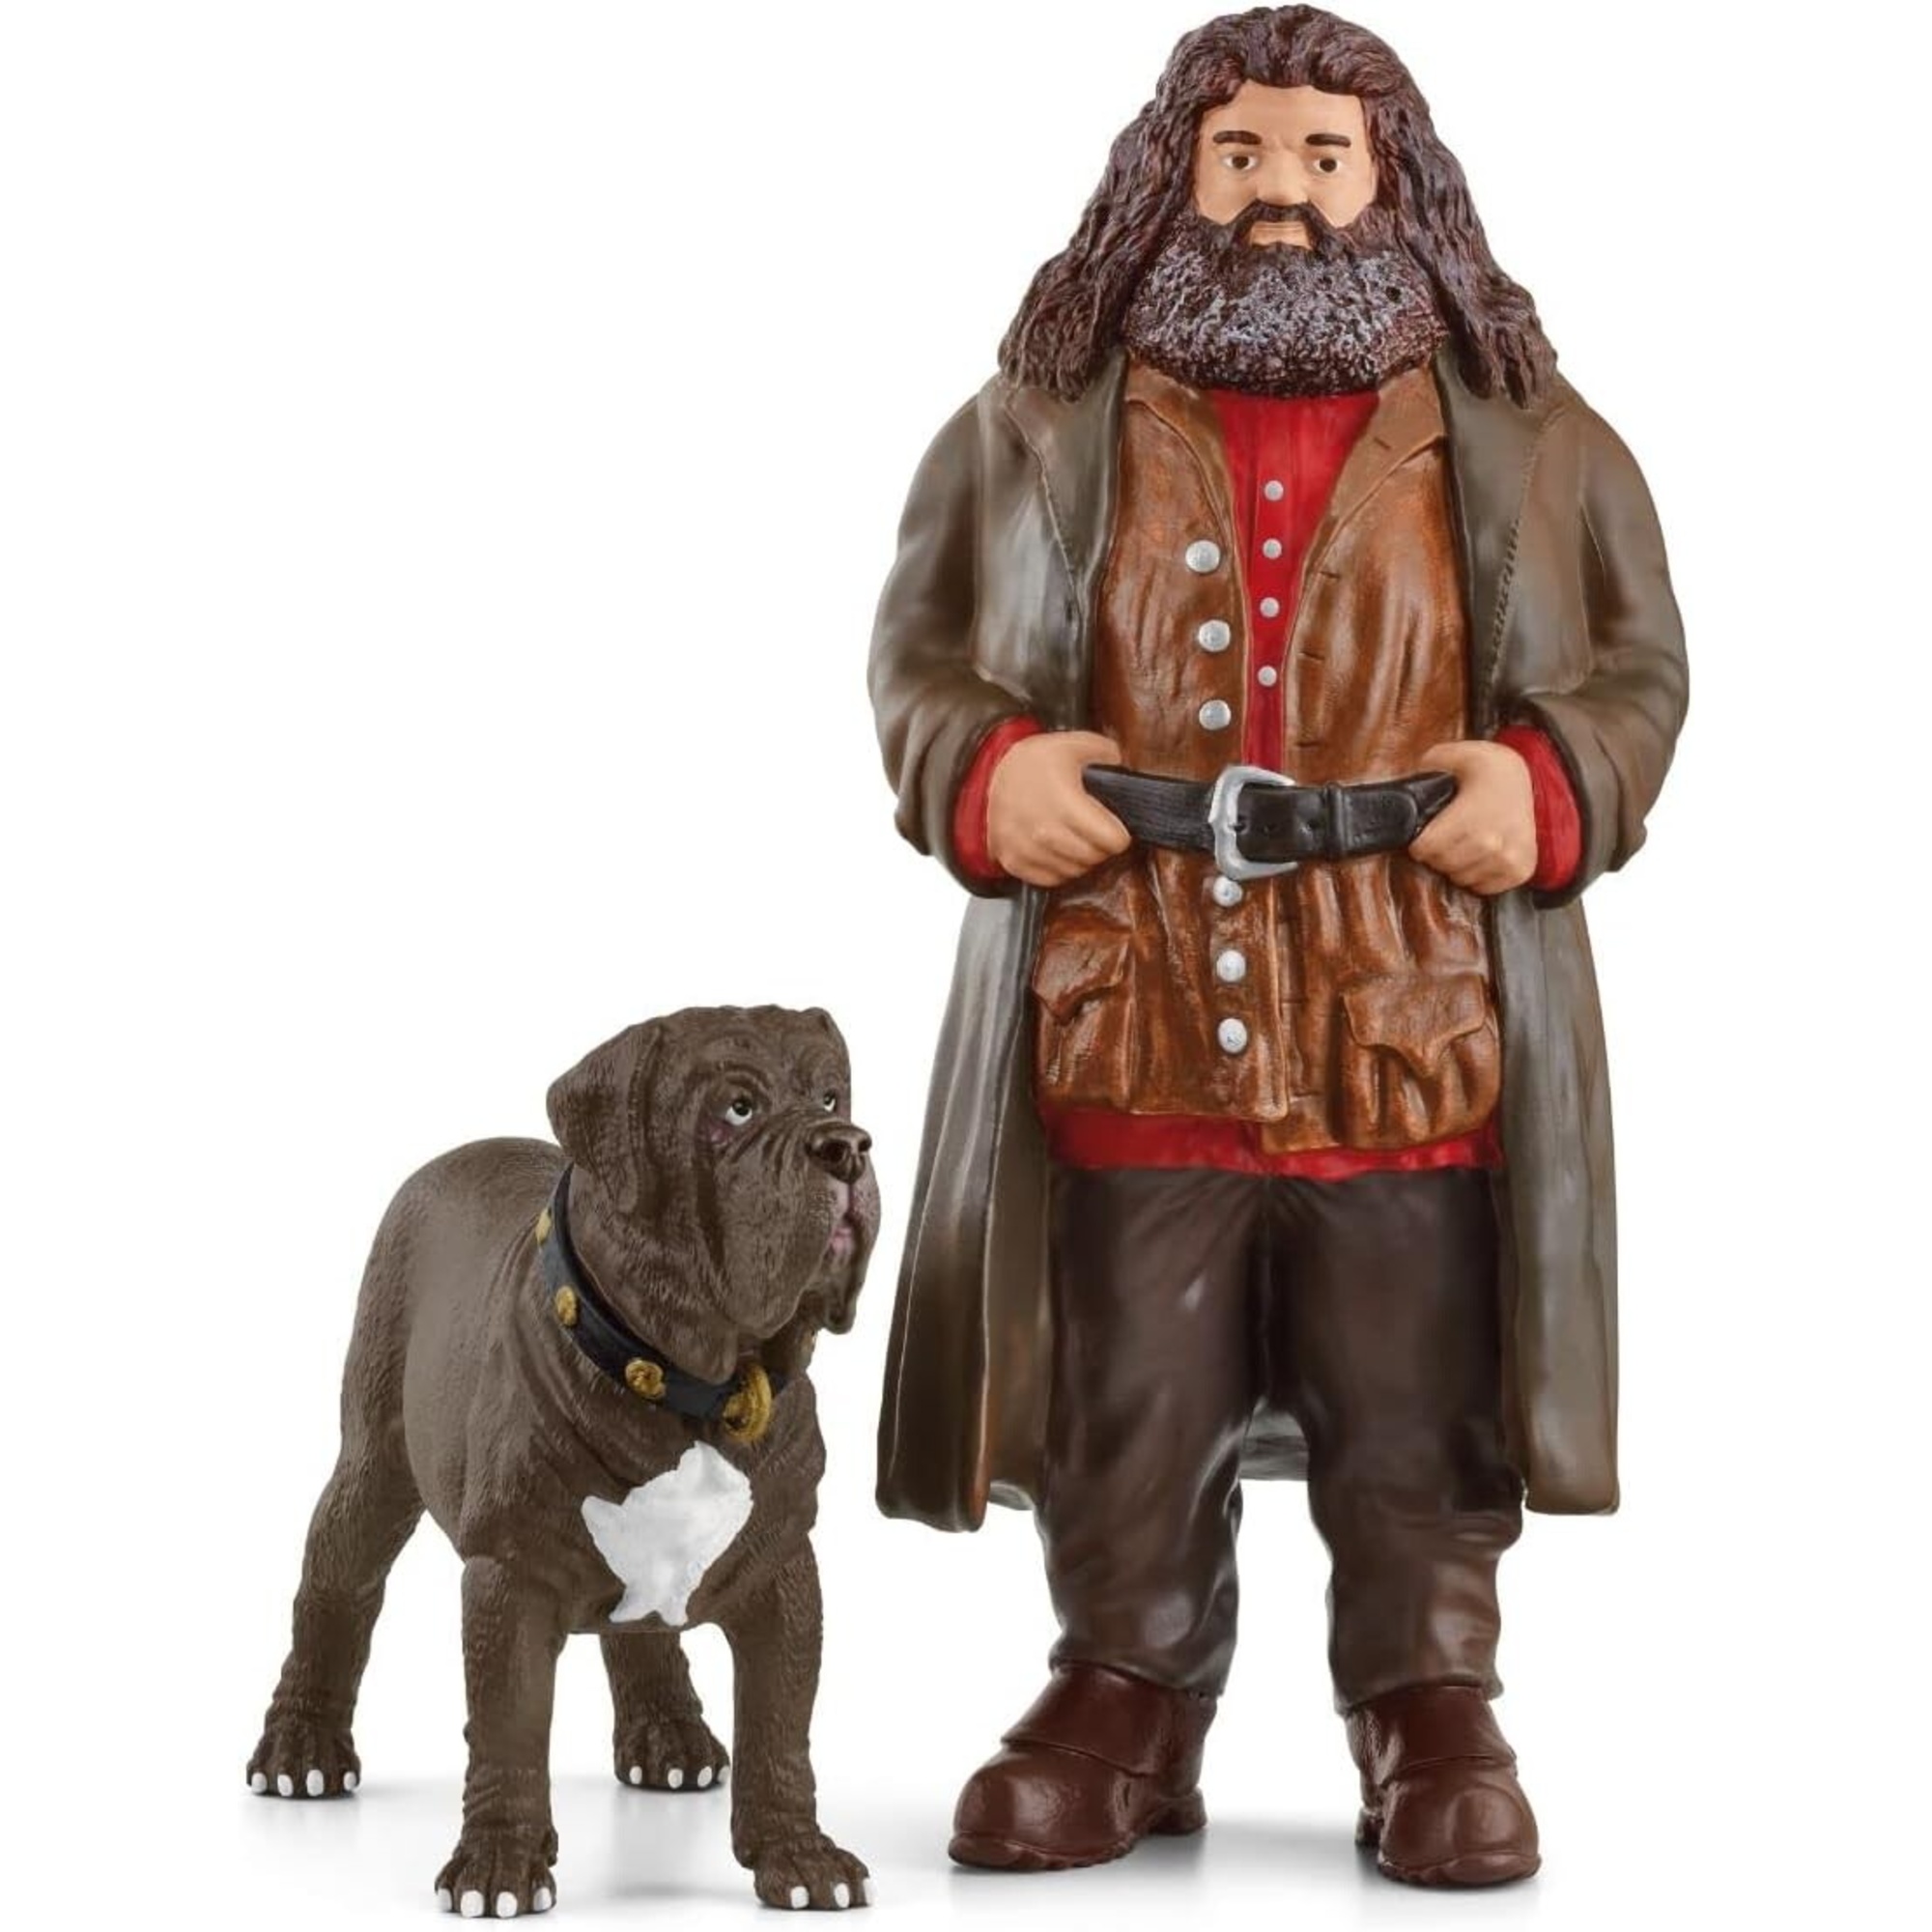 Schleich- hagrid e fang wizarding world playset, multicolore, 42638 - Harry Potter, Schleich